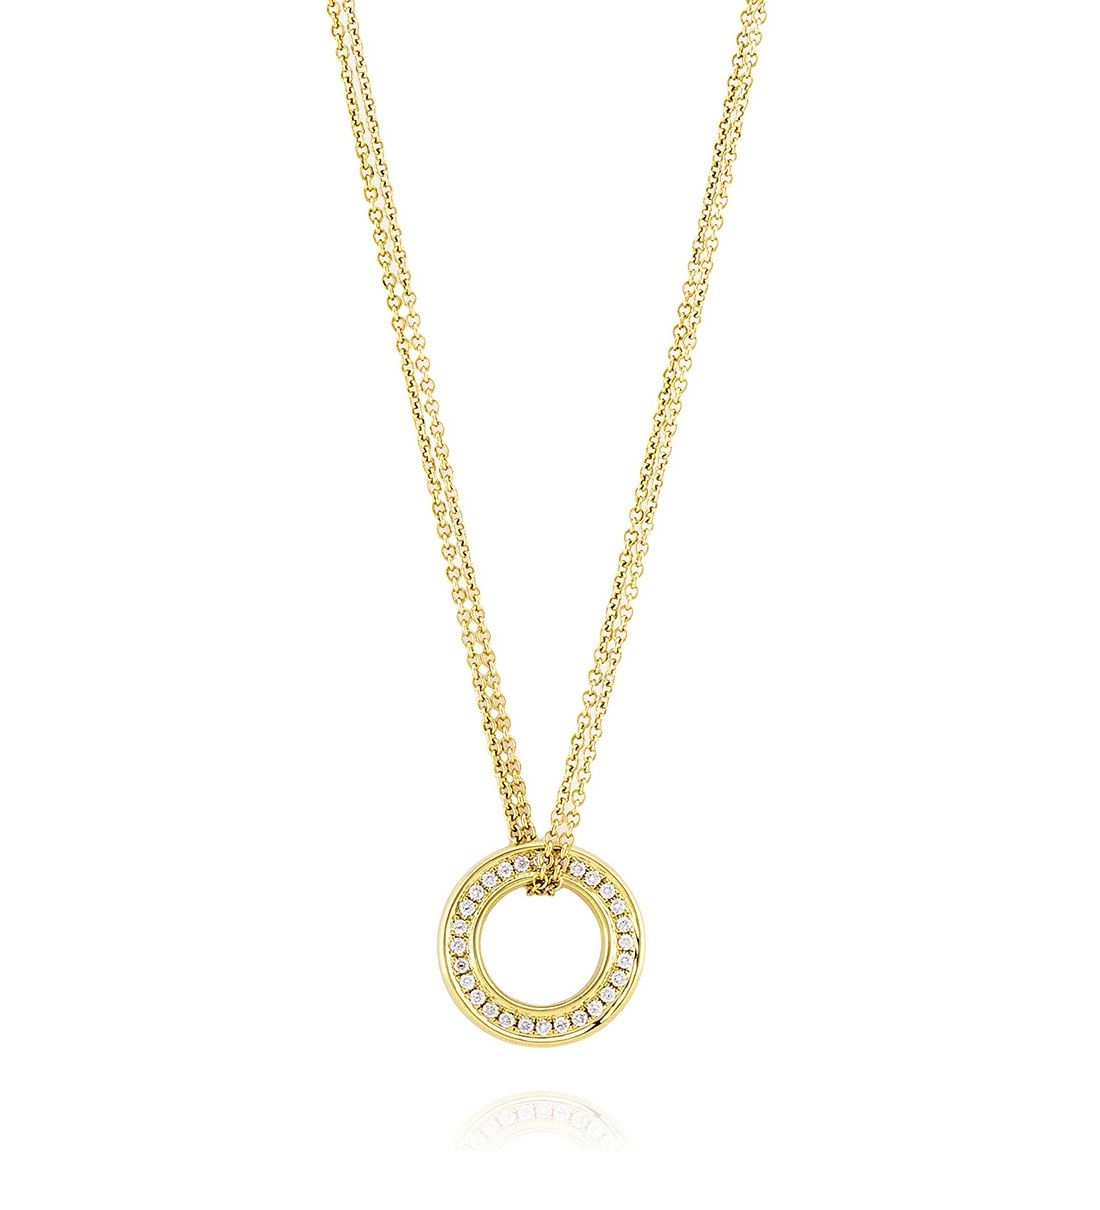 Small Roulette Yellow Gold Diamond Pendant | Boodles Within Best And Newest Small Diamond Necklaces (View 21 of 25)